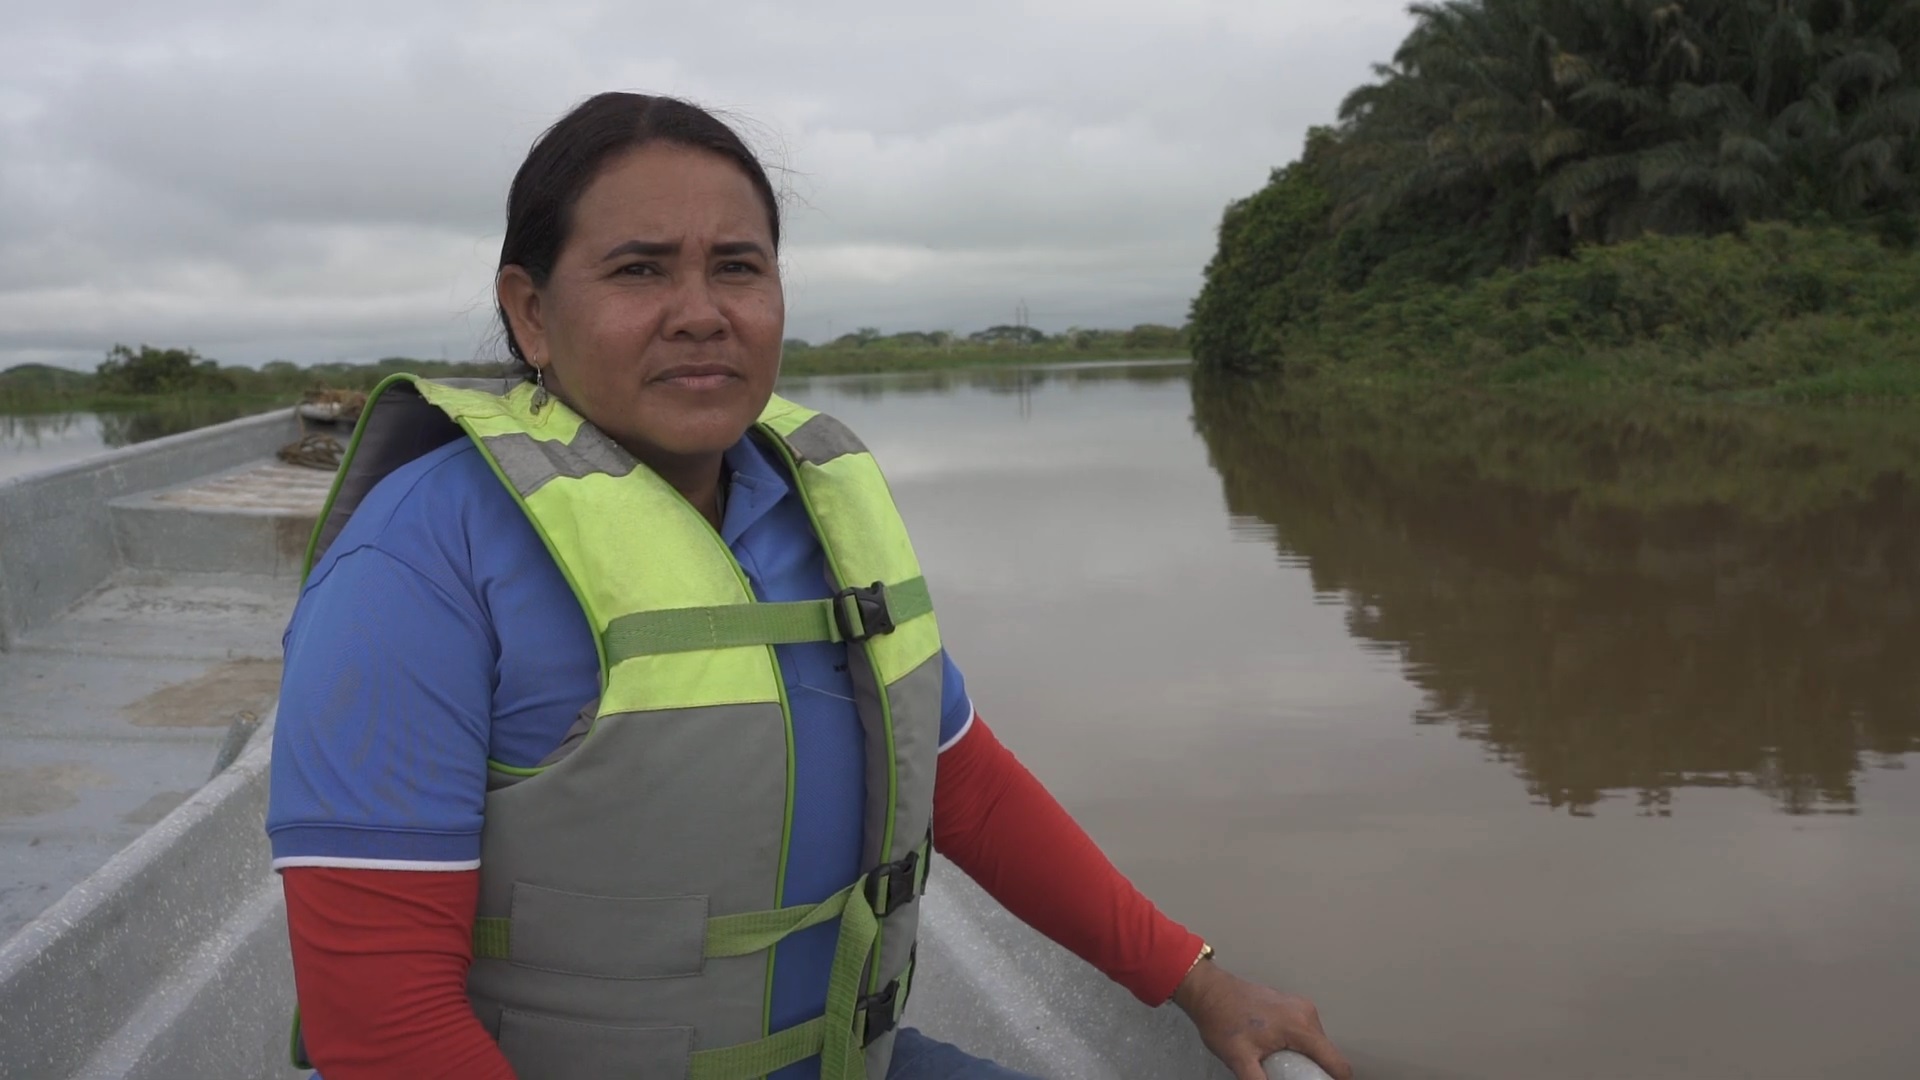 Yuly Velasquez travels in a boat on the river